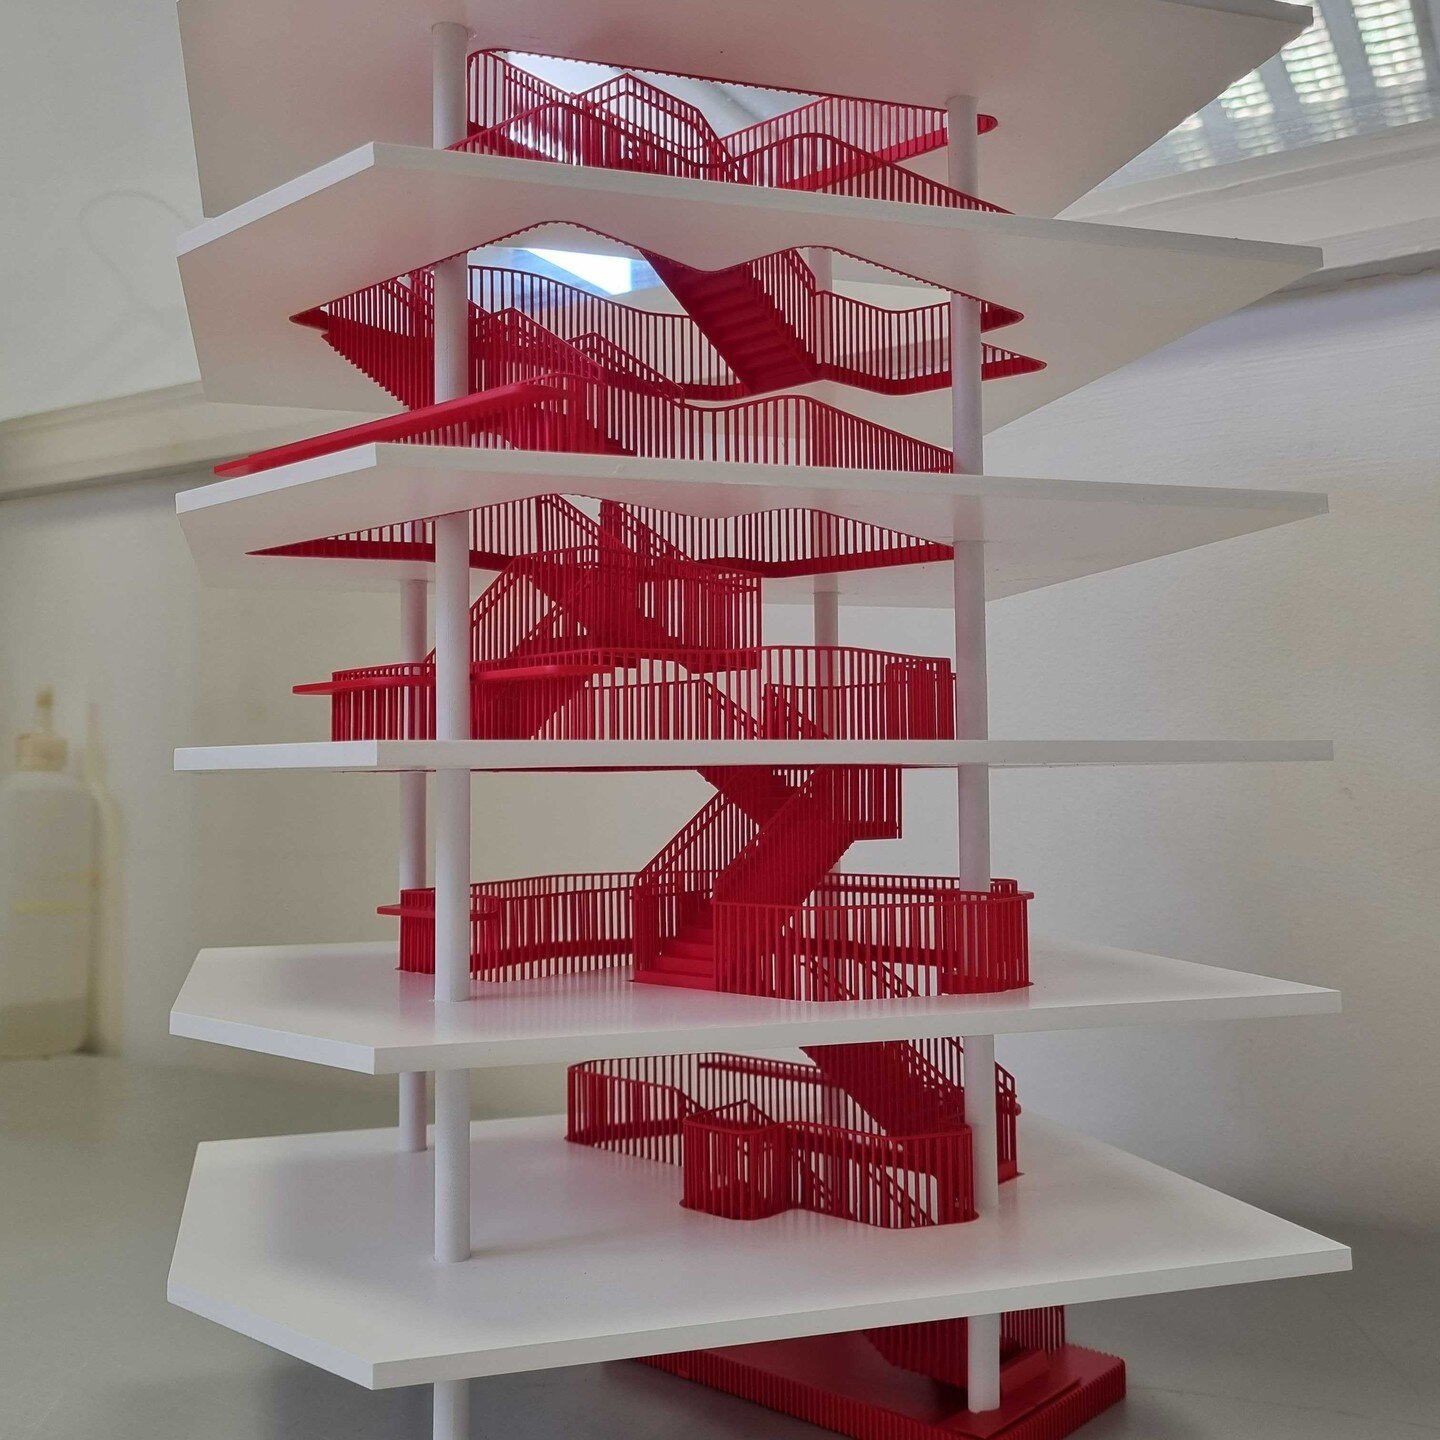 A physical model always works well to explain a concept to a client. Here is another good example for #3dprinting and #modelmaking combined. #stereolithography #3dprinted stairs sprayed red with white laser-cut floor plates and acrylic rod floor divi